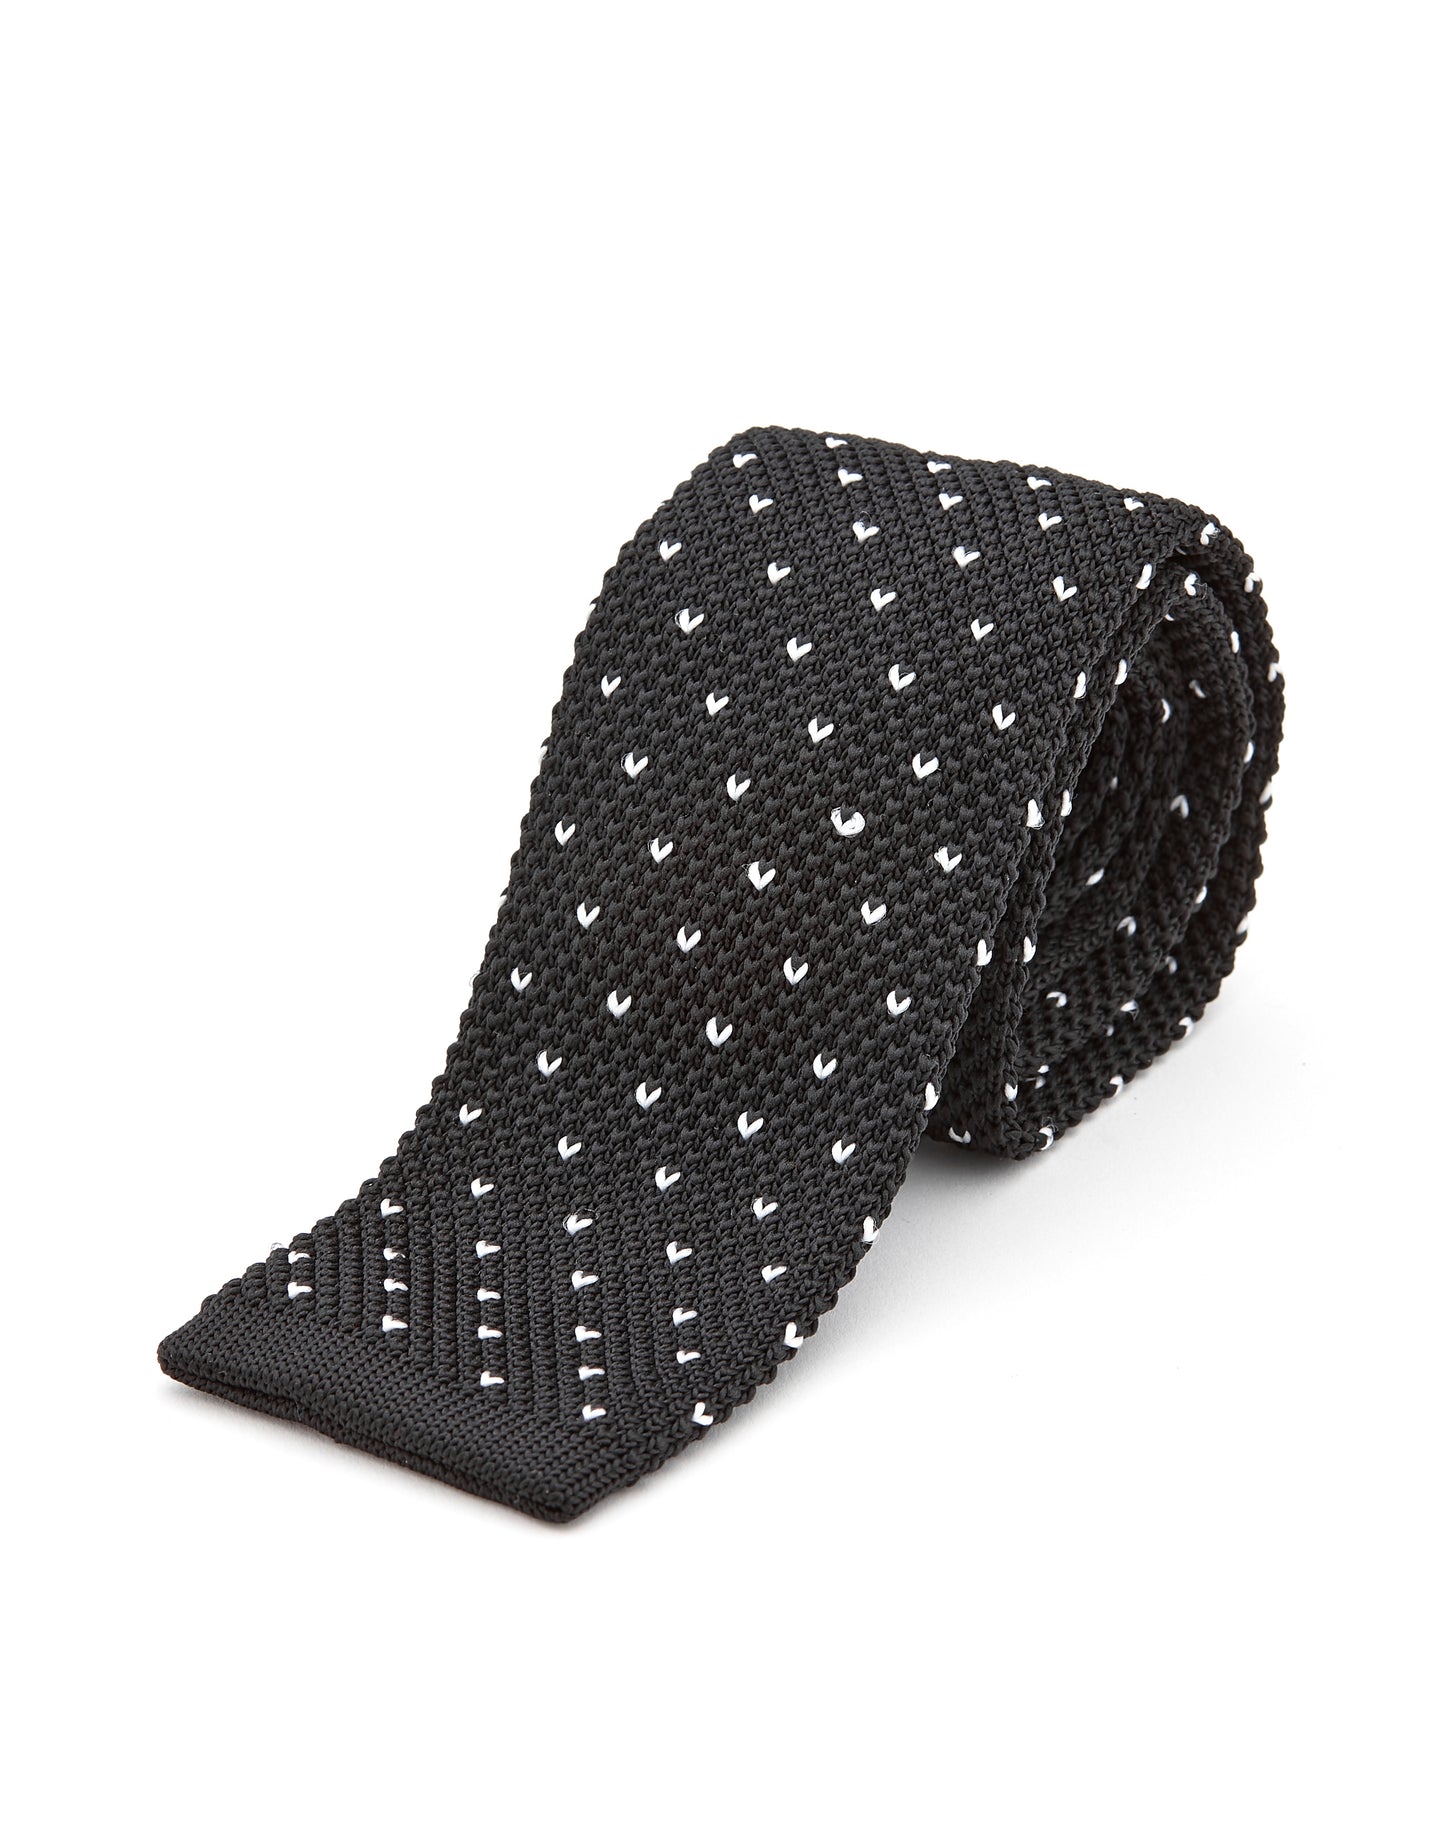 Knitted Tie Black / Spot